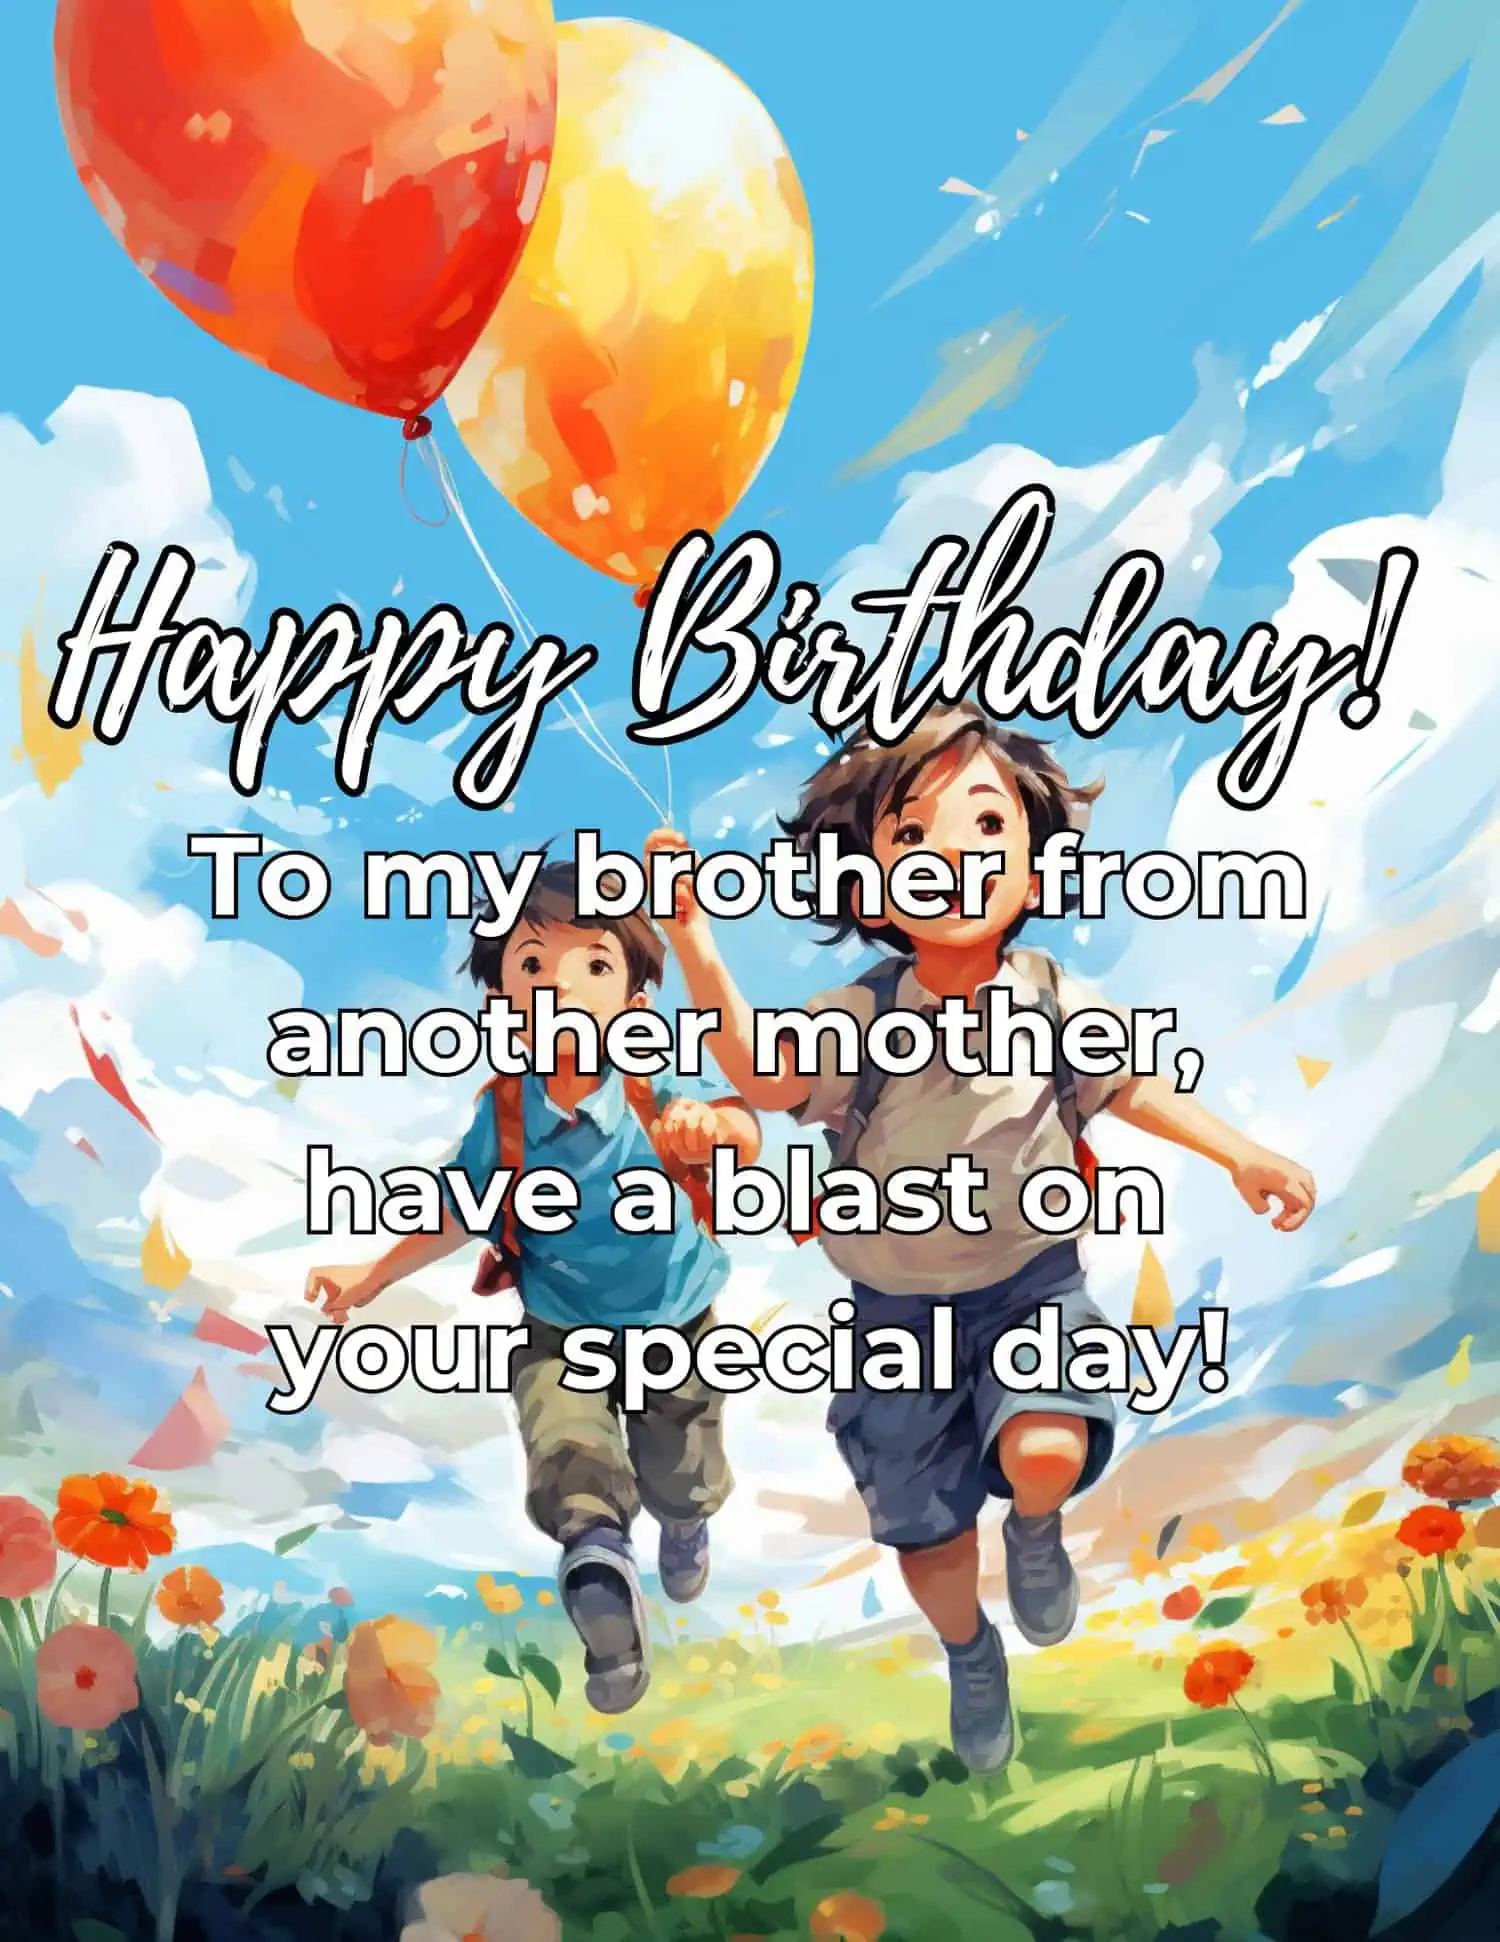 Delve into a mix of humorous, heartfelt, and meaningful birthday wishes, each crafted to celebrate your male best friend's special day in a unique way.